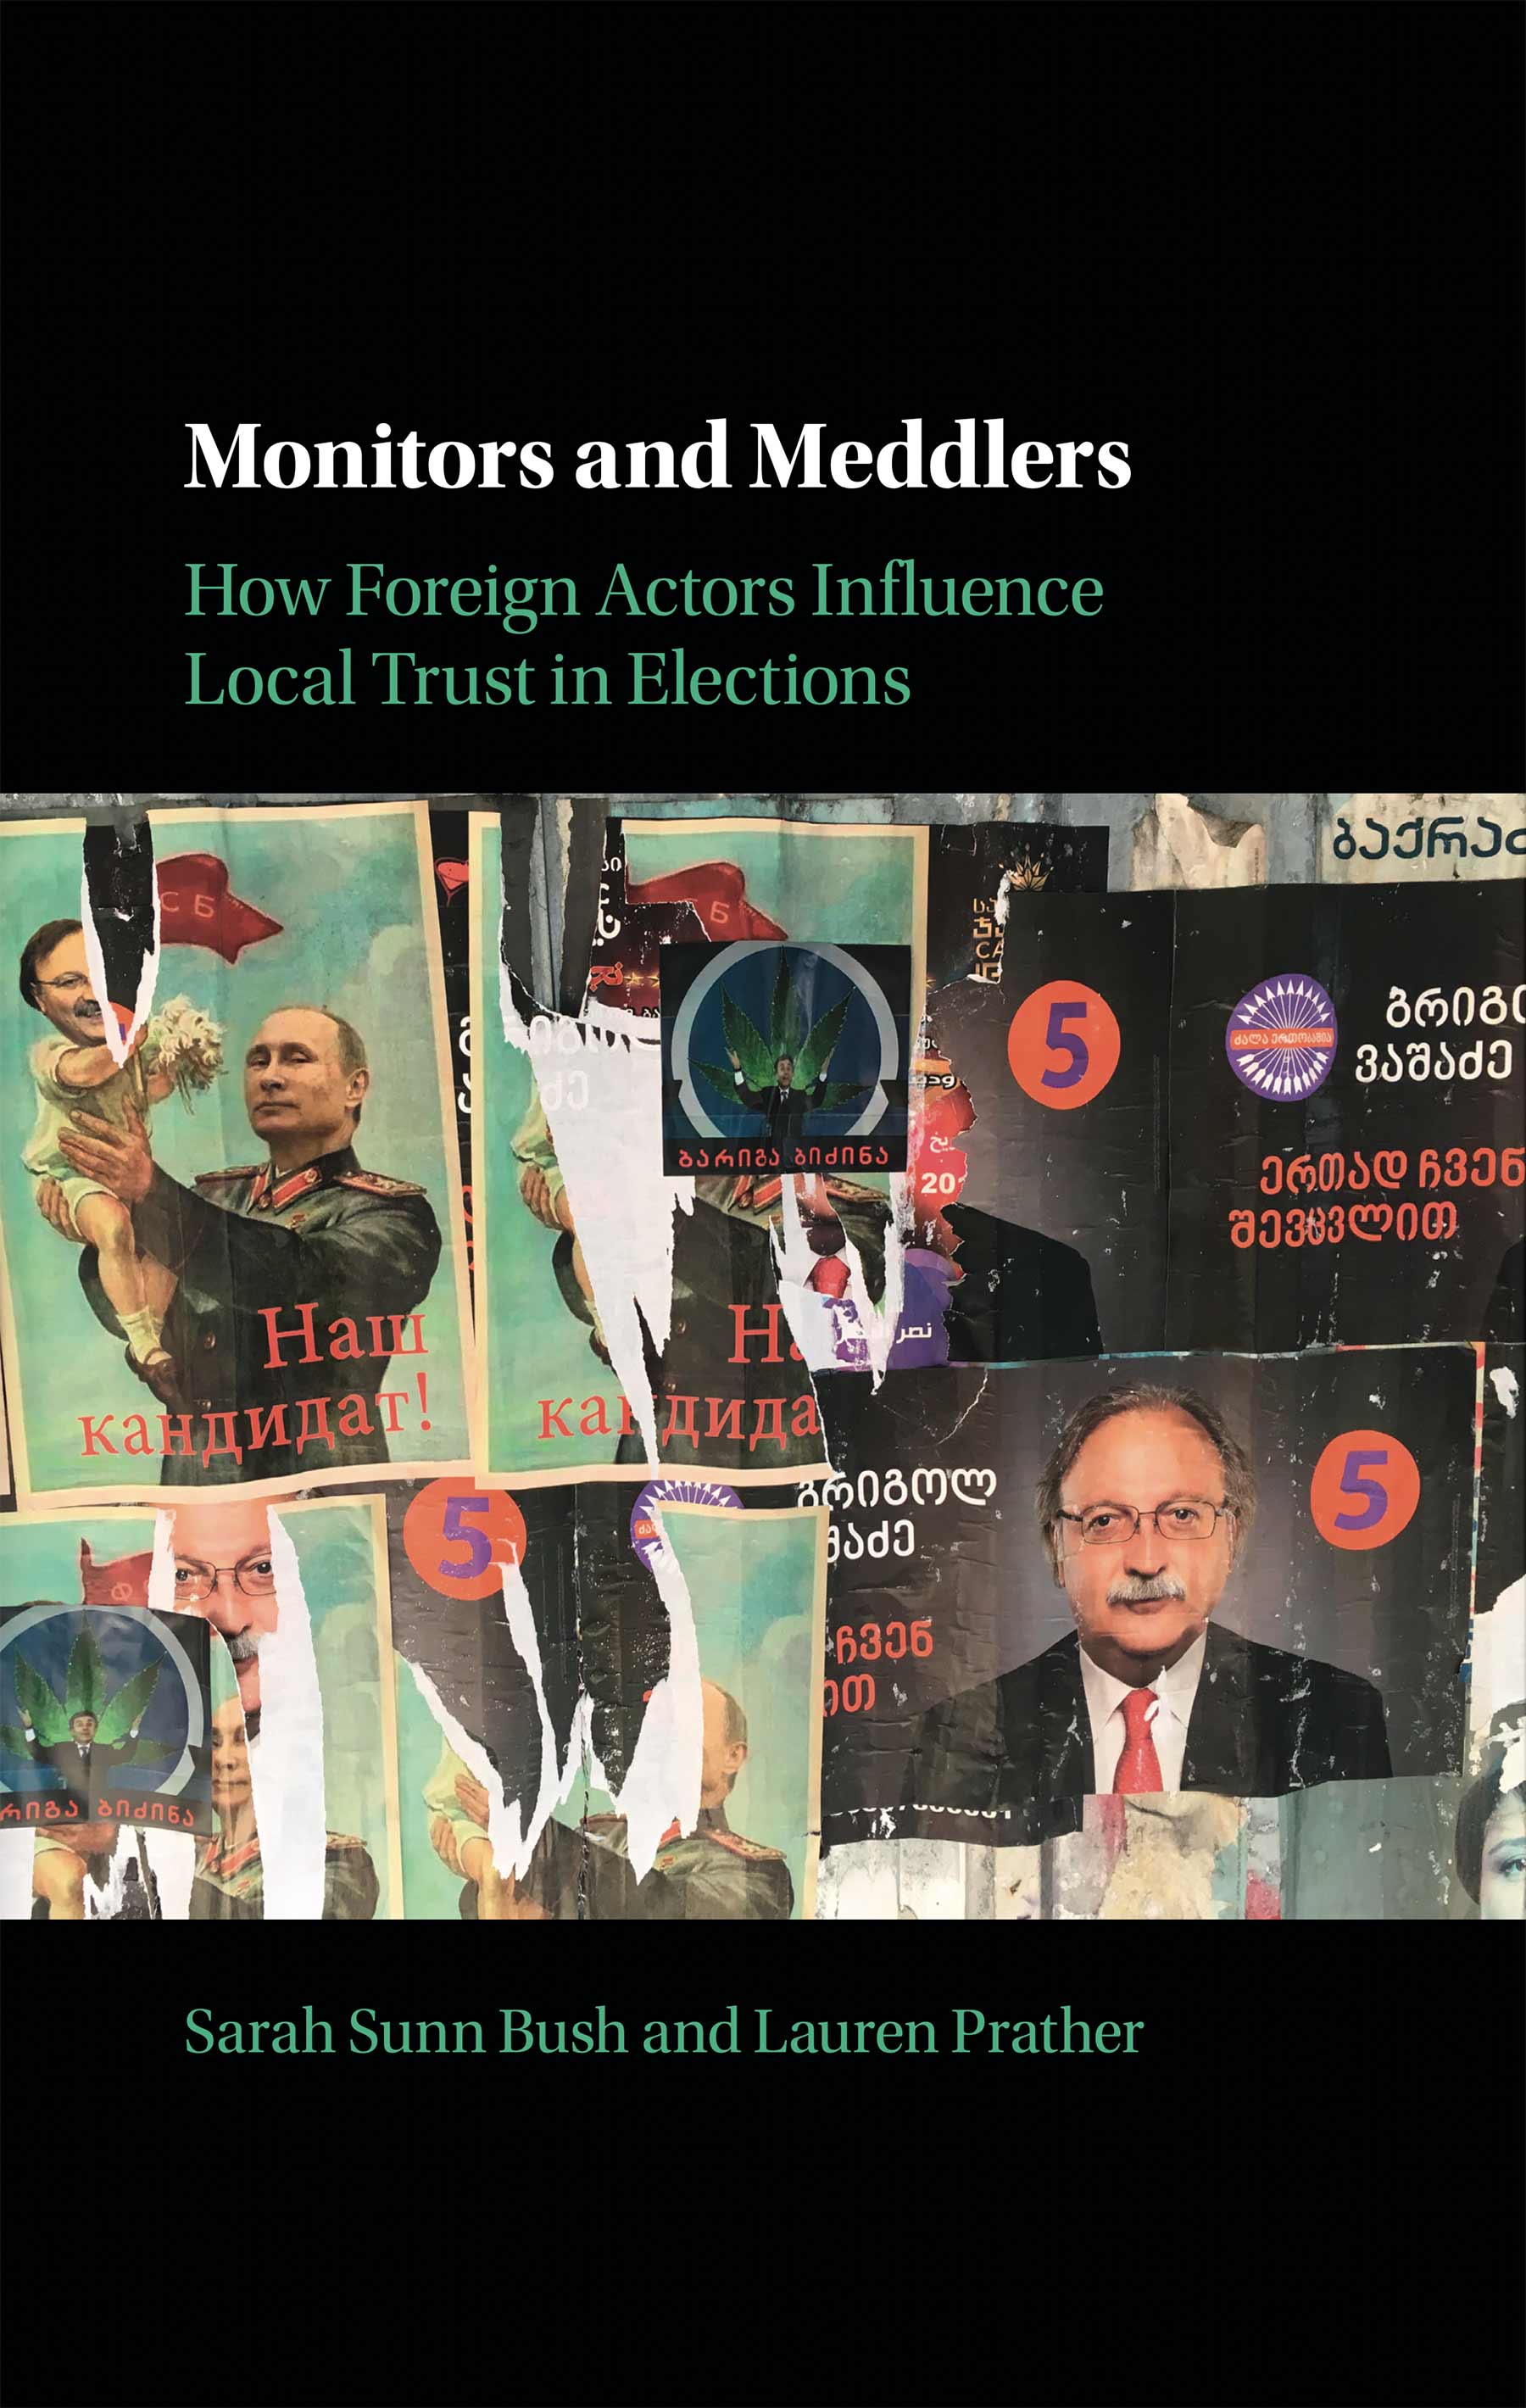 The cover of the book Monitors and Meddlers: How Foreign Actors Influence Local Trust in Elections.